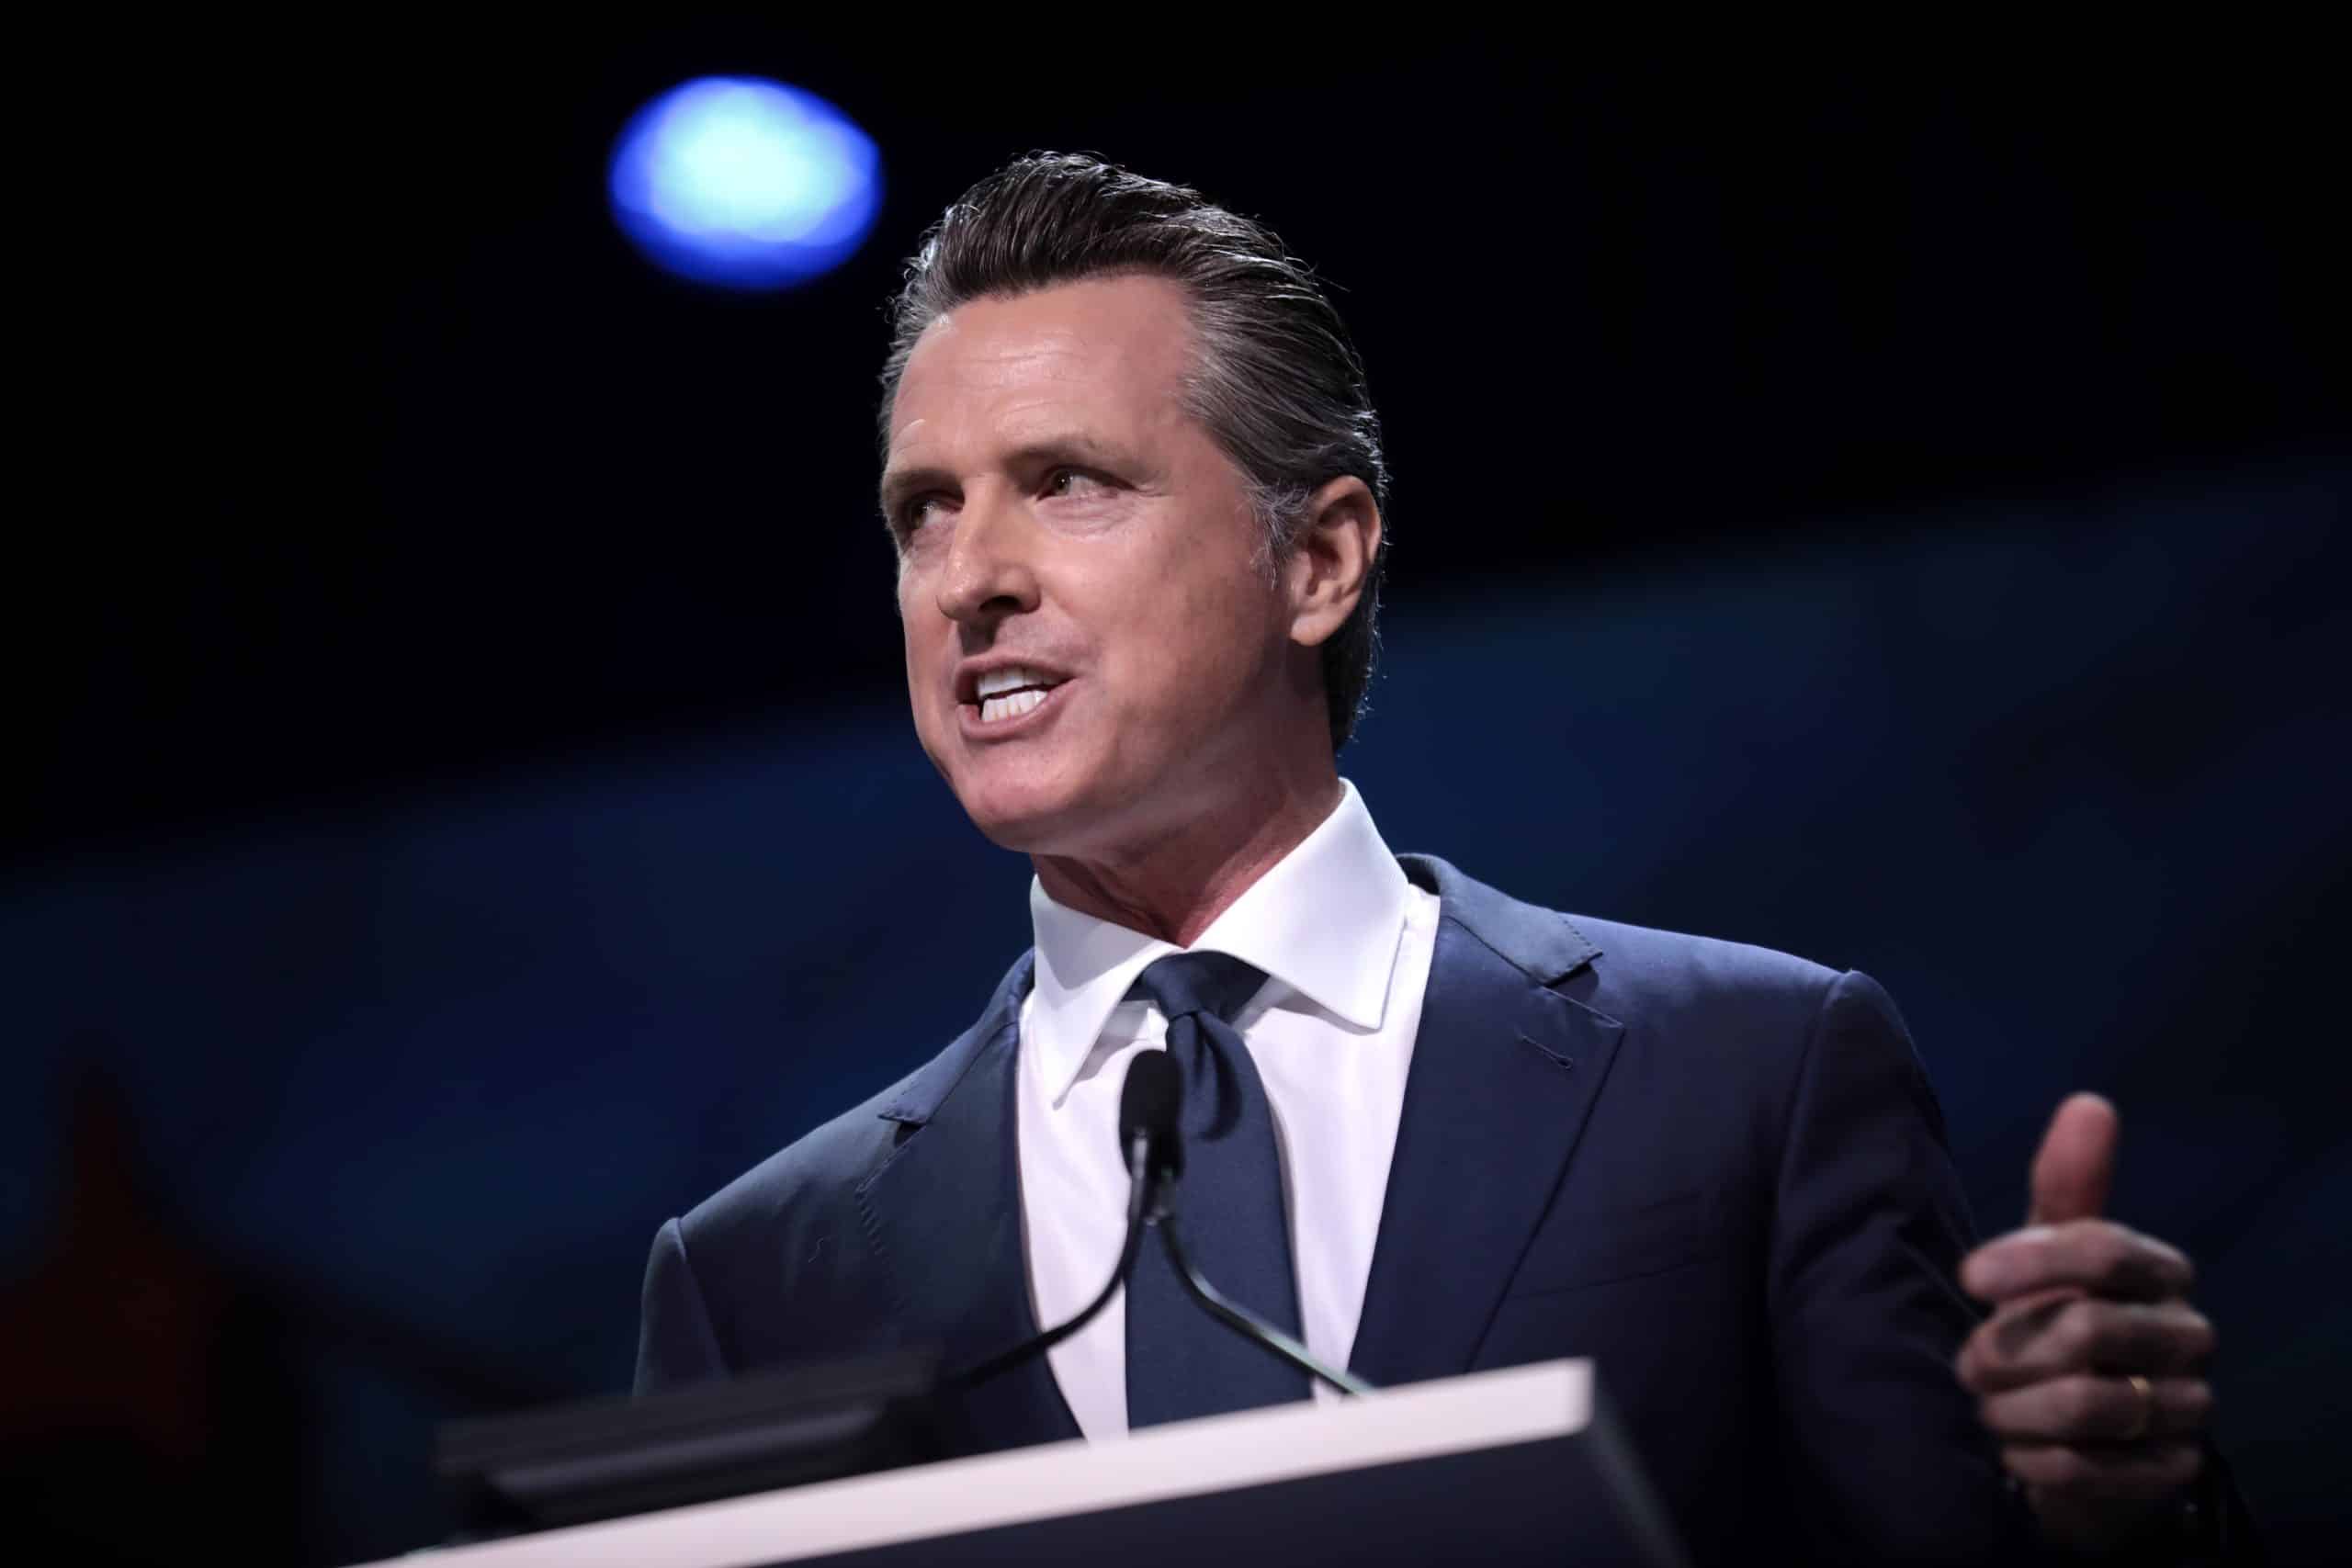 Sources Gavin Newsom Will 'Unequivocally' Run for President in 2024